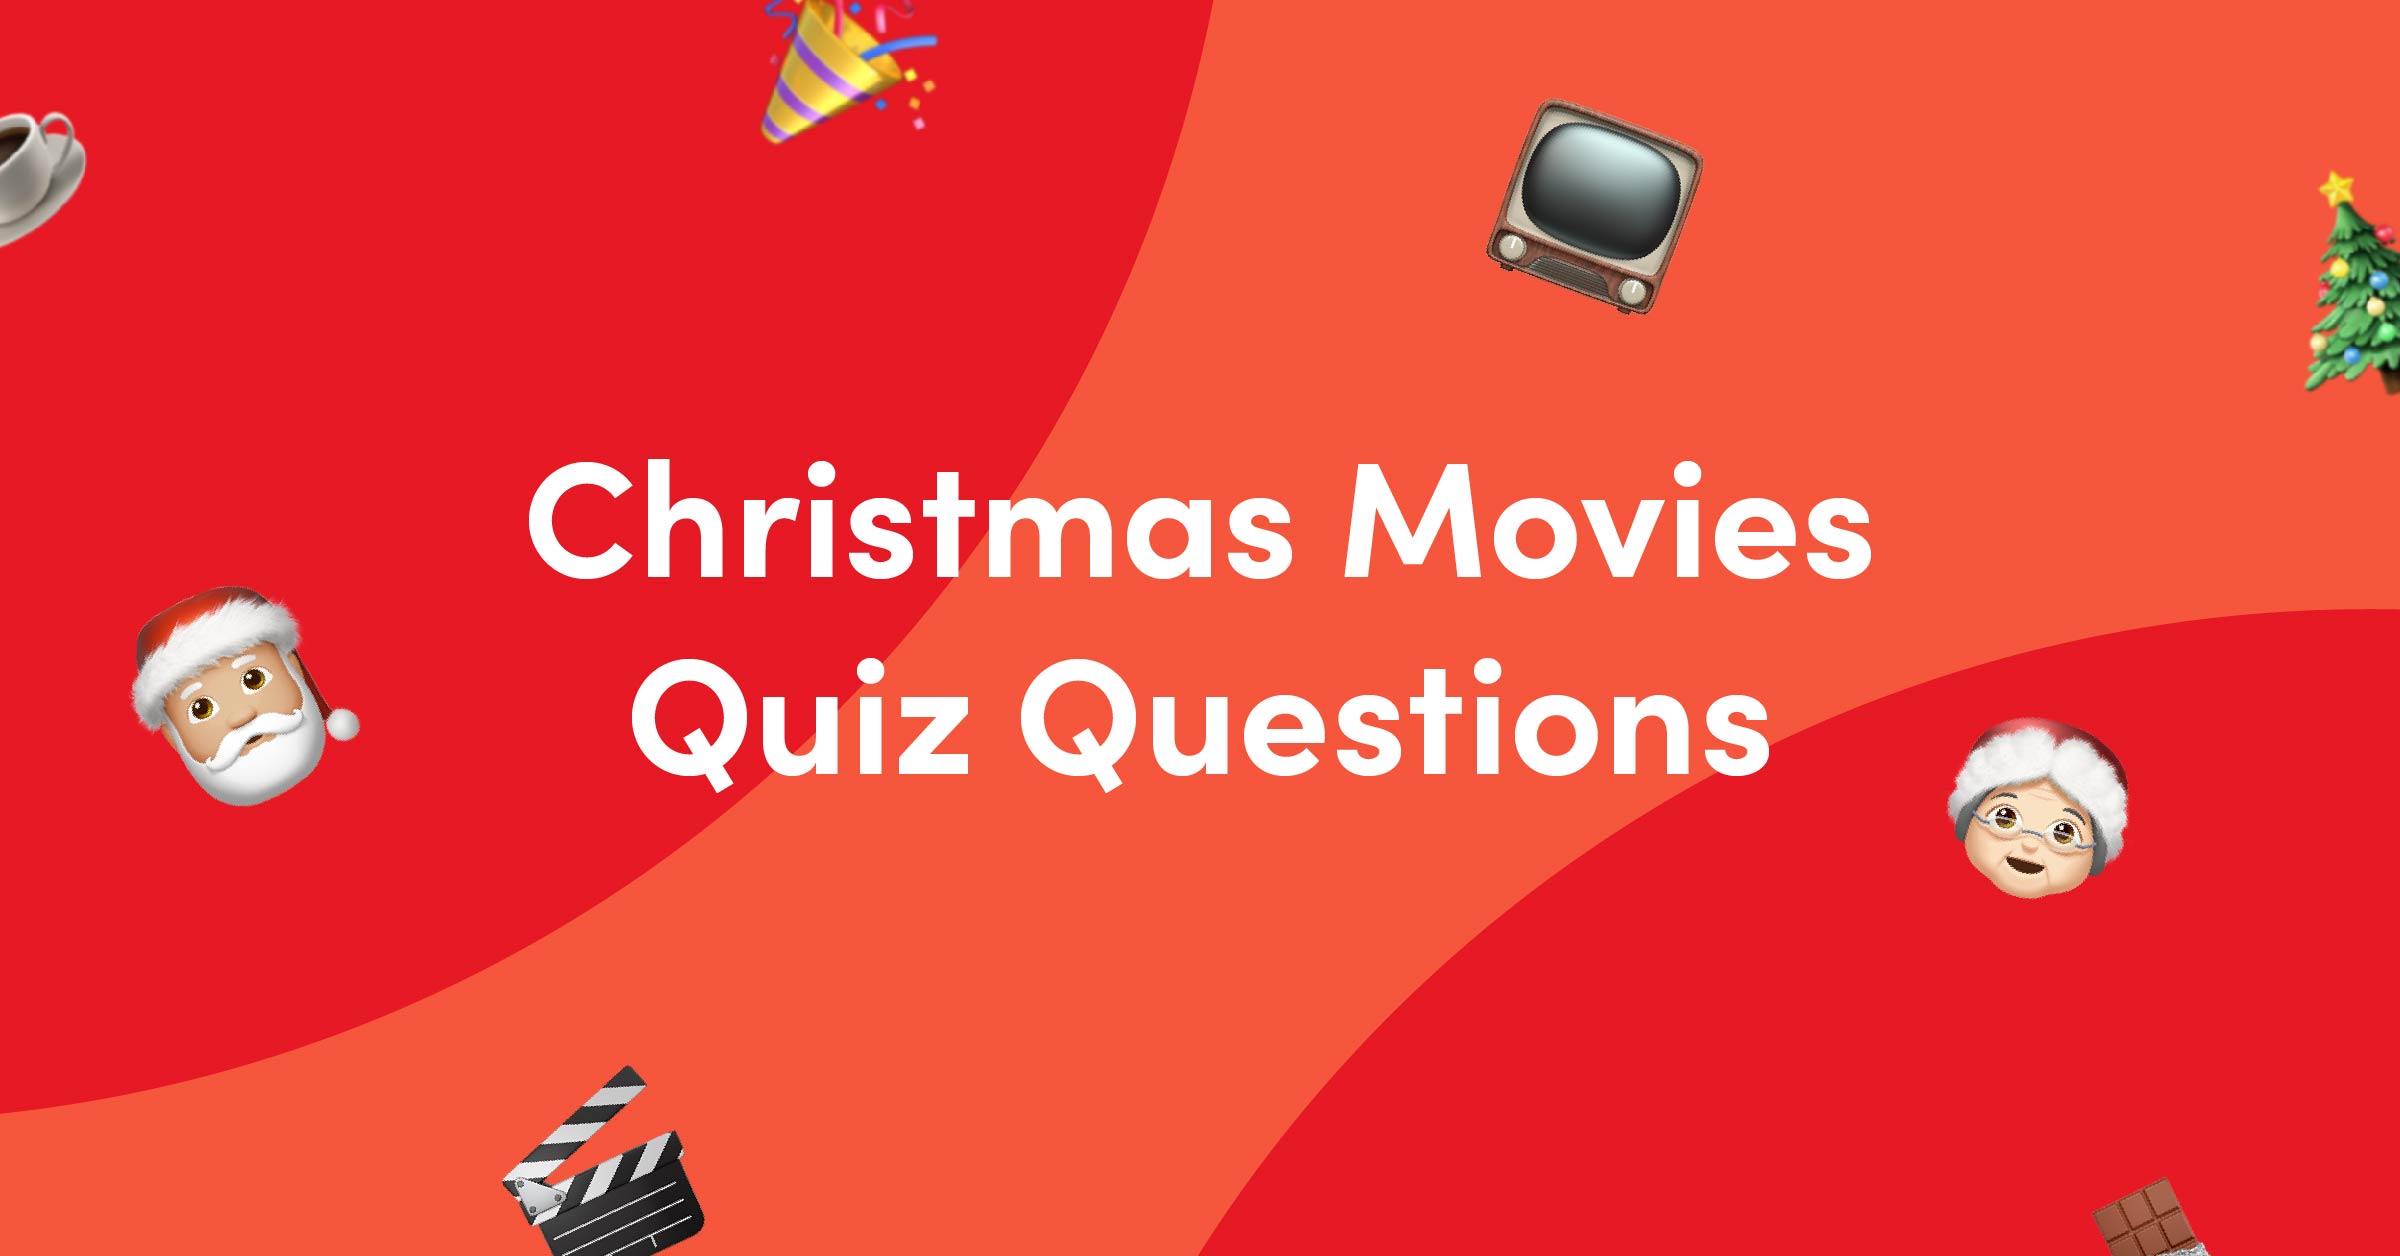 Emojis on red background for Christmas Movies quiz questions and answers